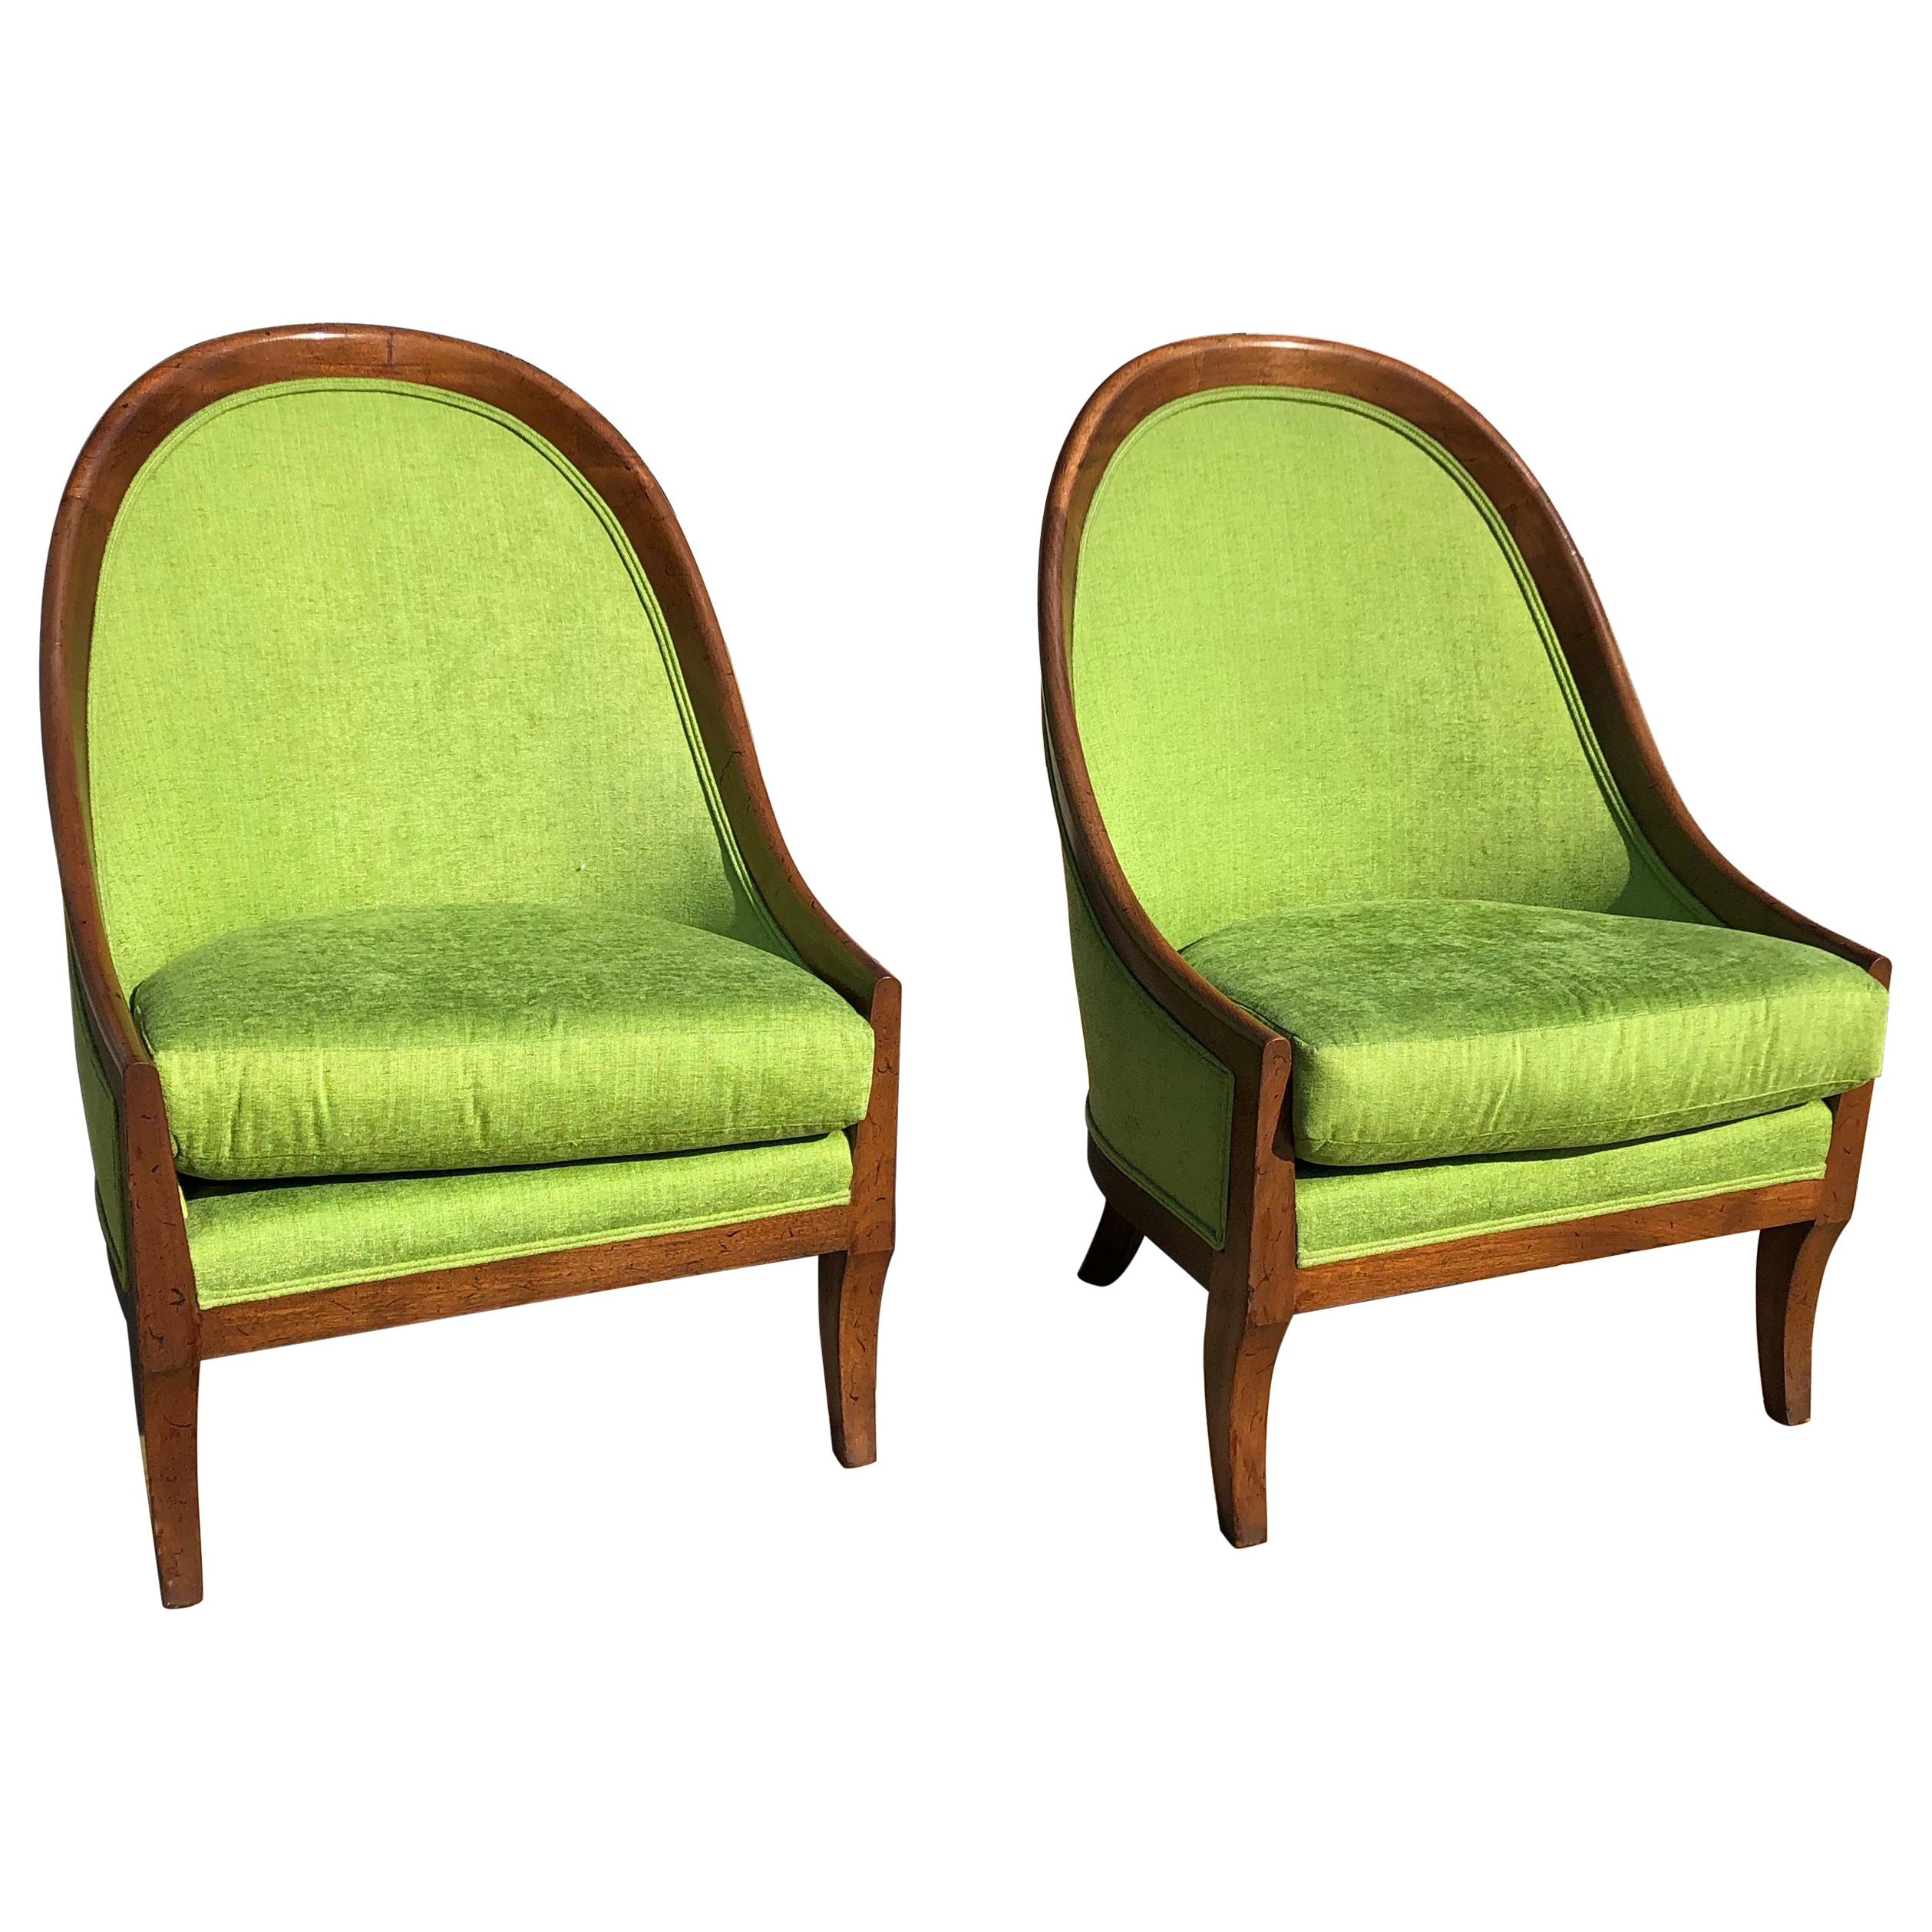 Dunbar Curved-Back Lounge Chairs